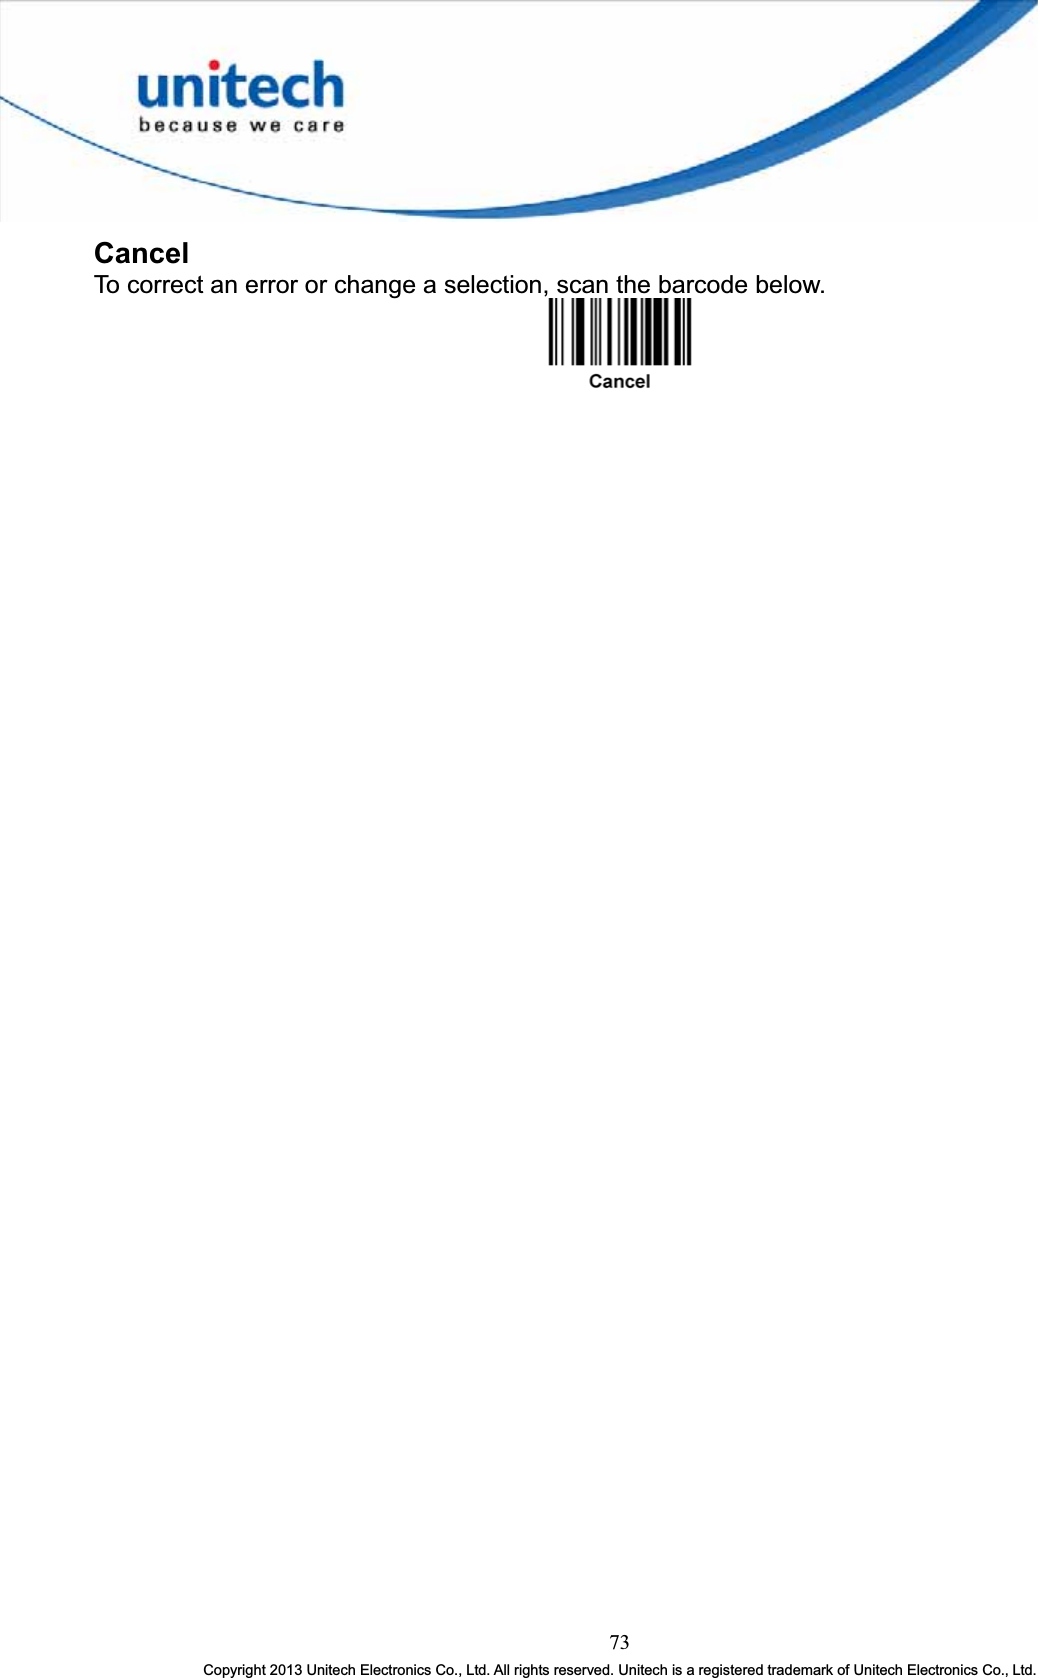 CancelTo correct an error or change a selection, scan the barcode below. 73Copyright 2013 Unitech Electronics Co., Ltd. All rights reserved. Unitech is a registered trademark of Unitech Electronics Co., Ltd.